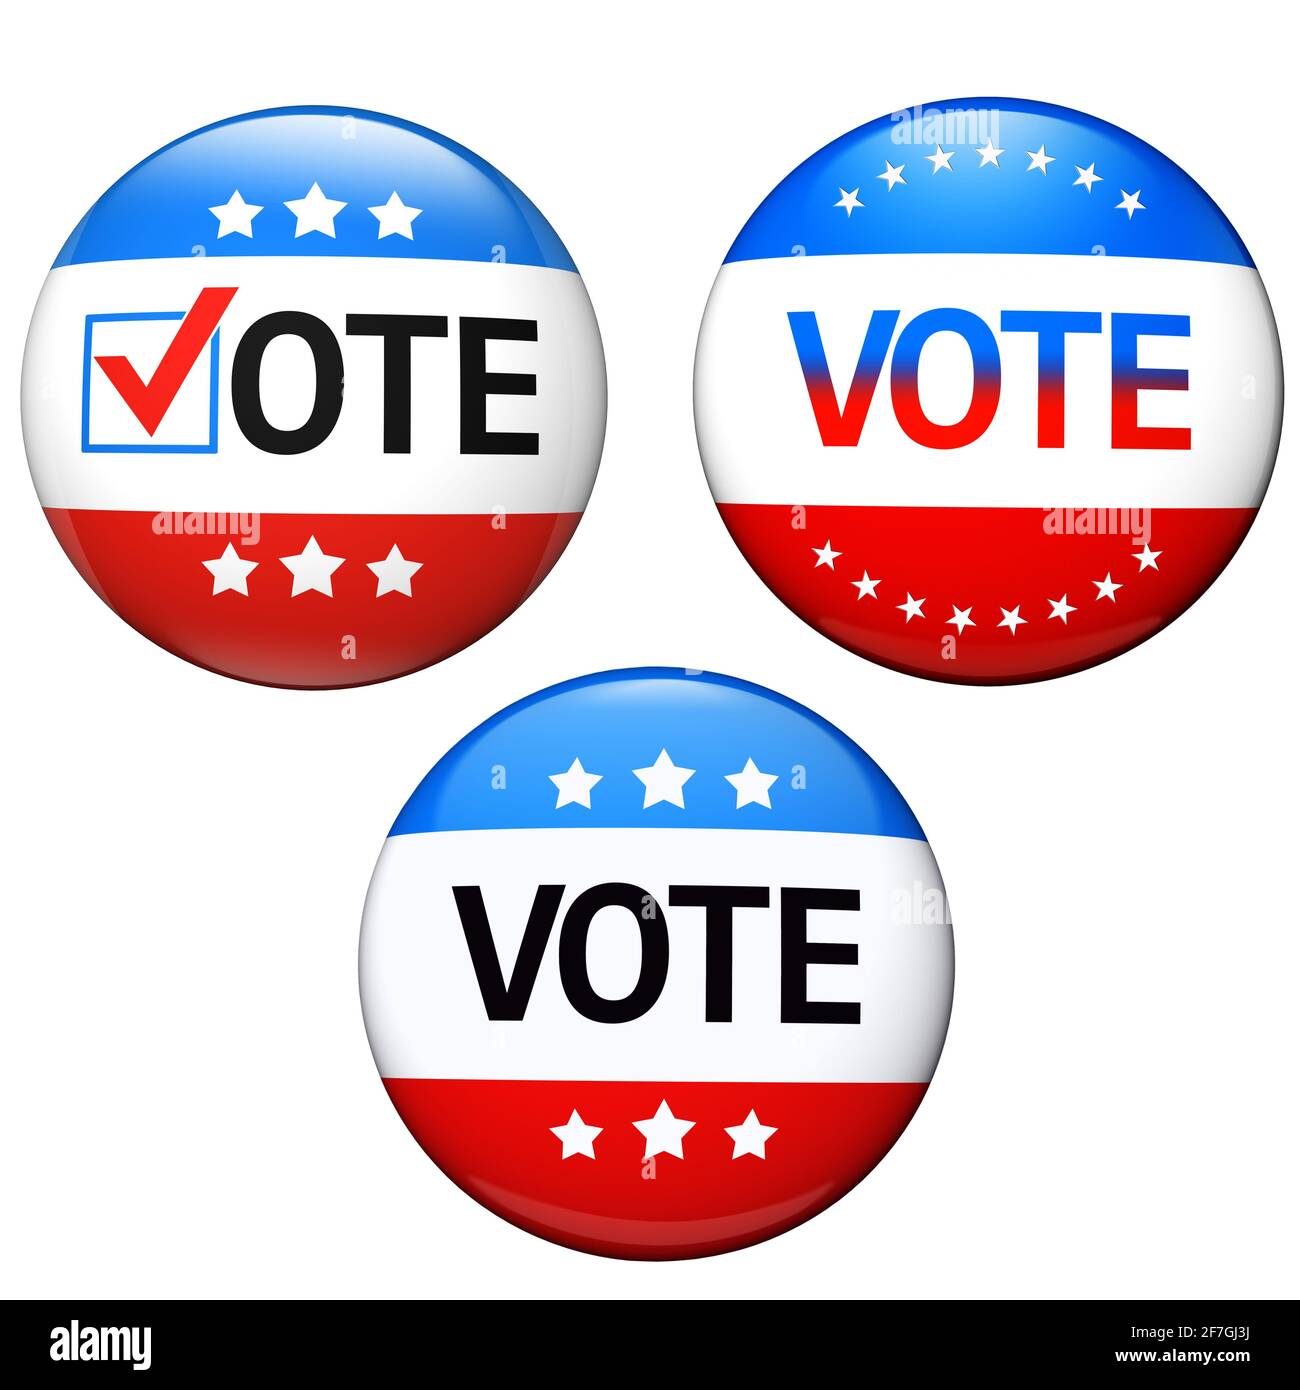 Vote election campaign glossy badge set. 3D Illustration Stock Photo